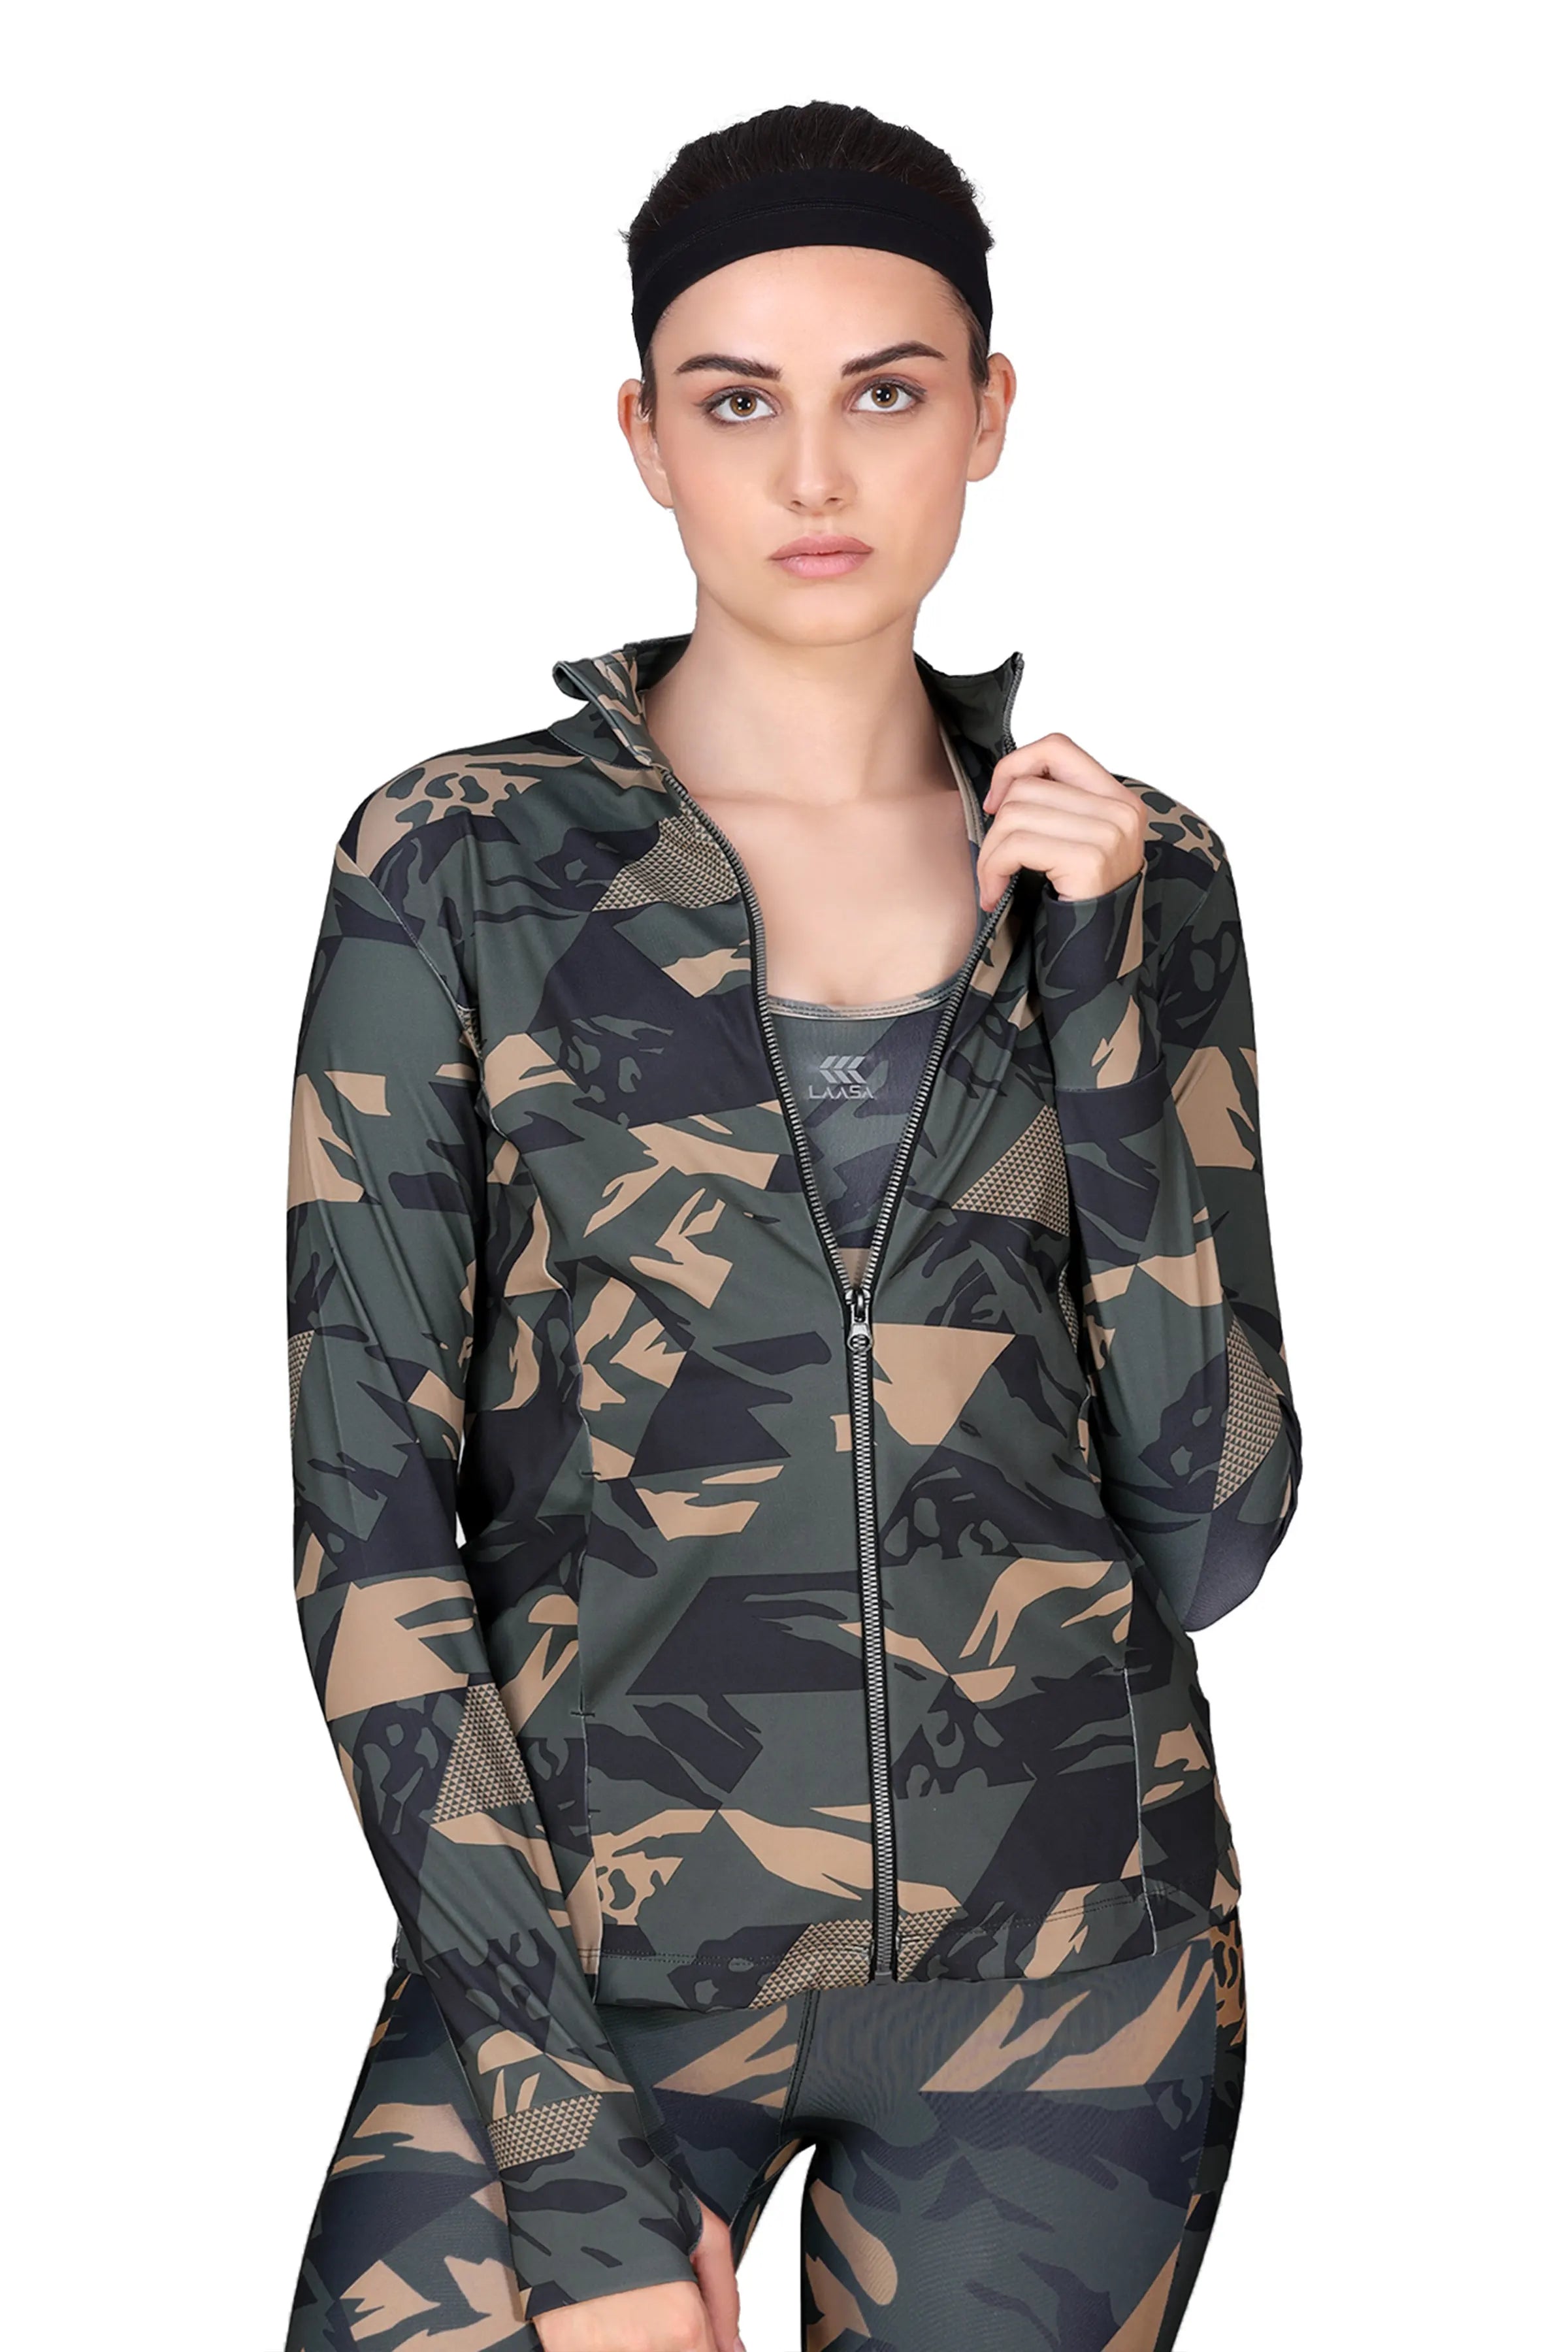 FULL-ZIP CAMOUFLAGE JACKET WITH THUMP HOLE – Laasa Sports